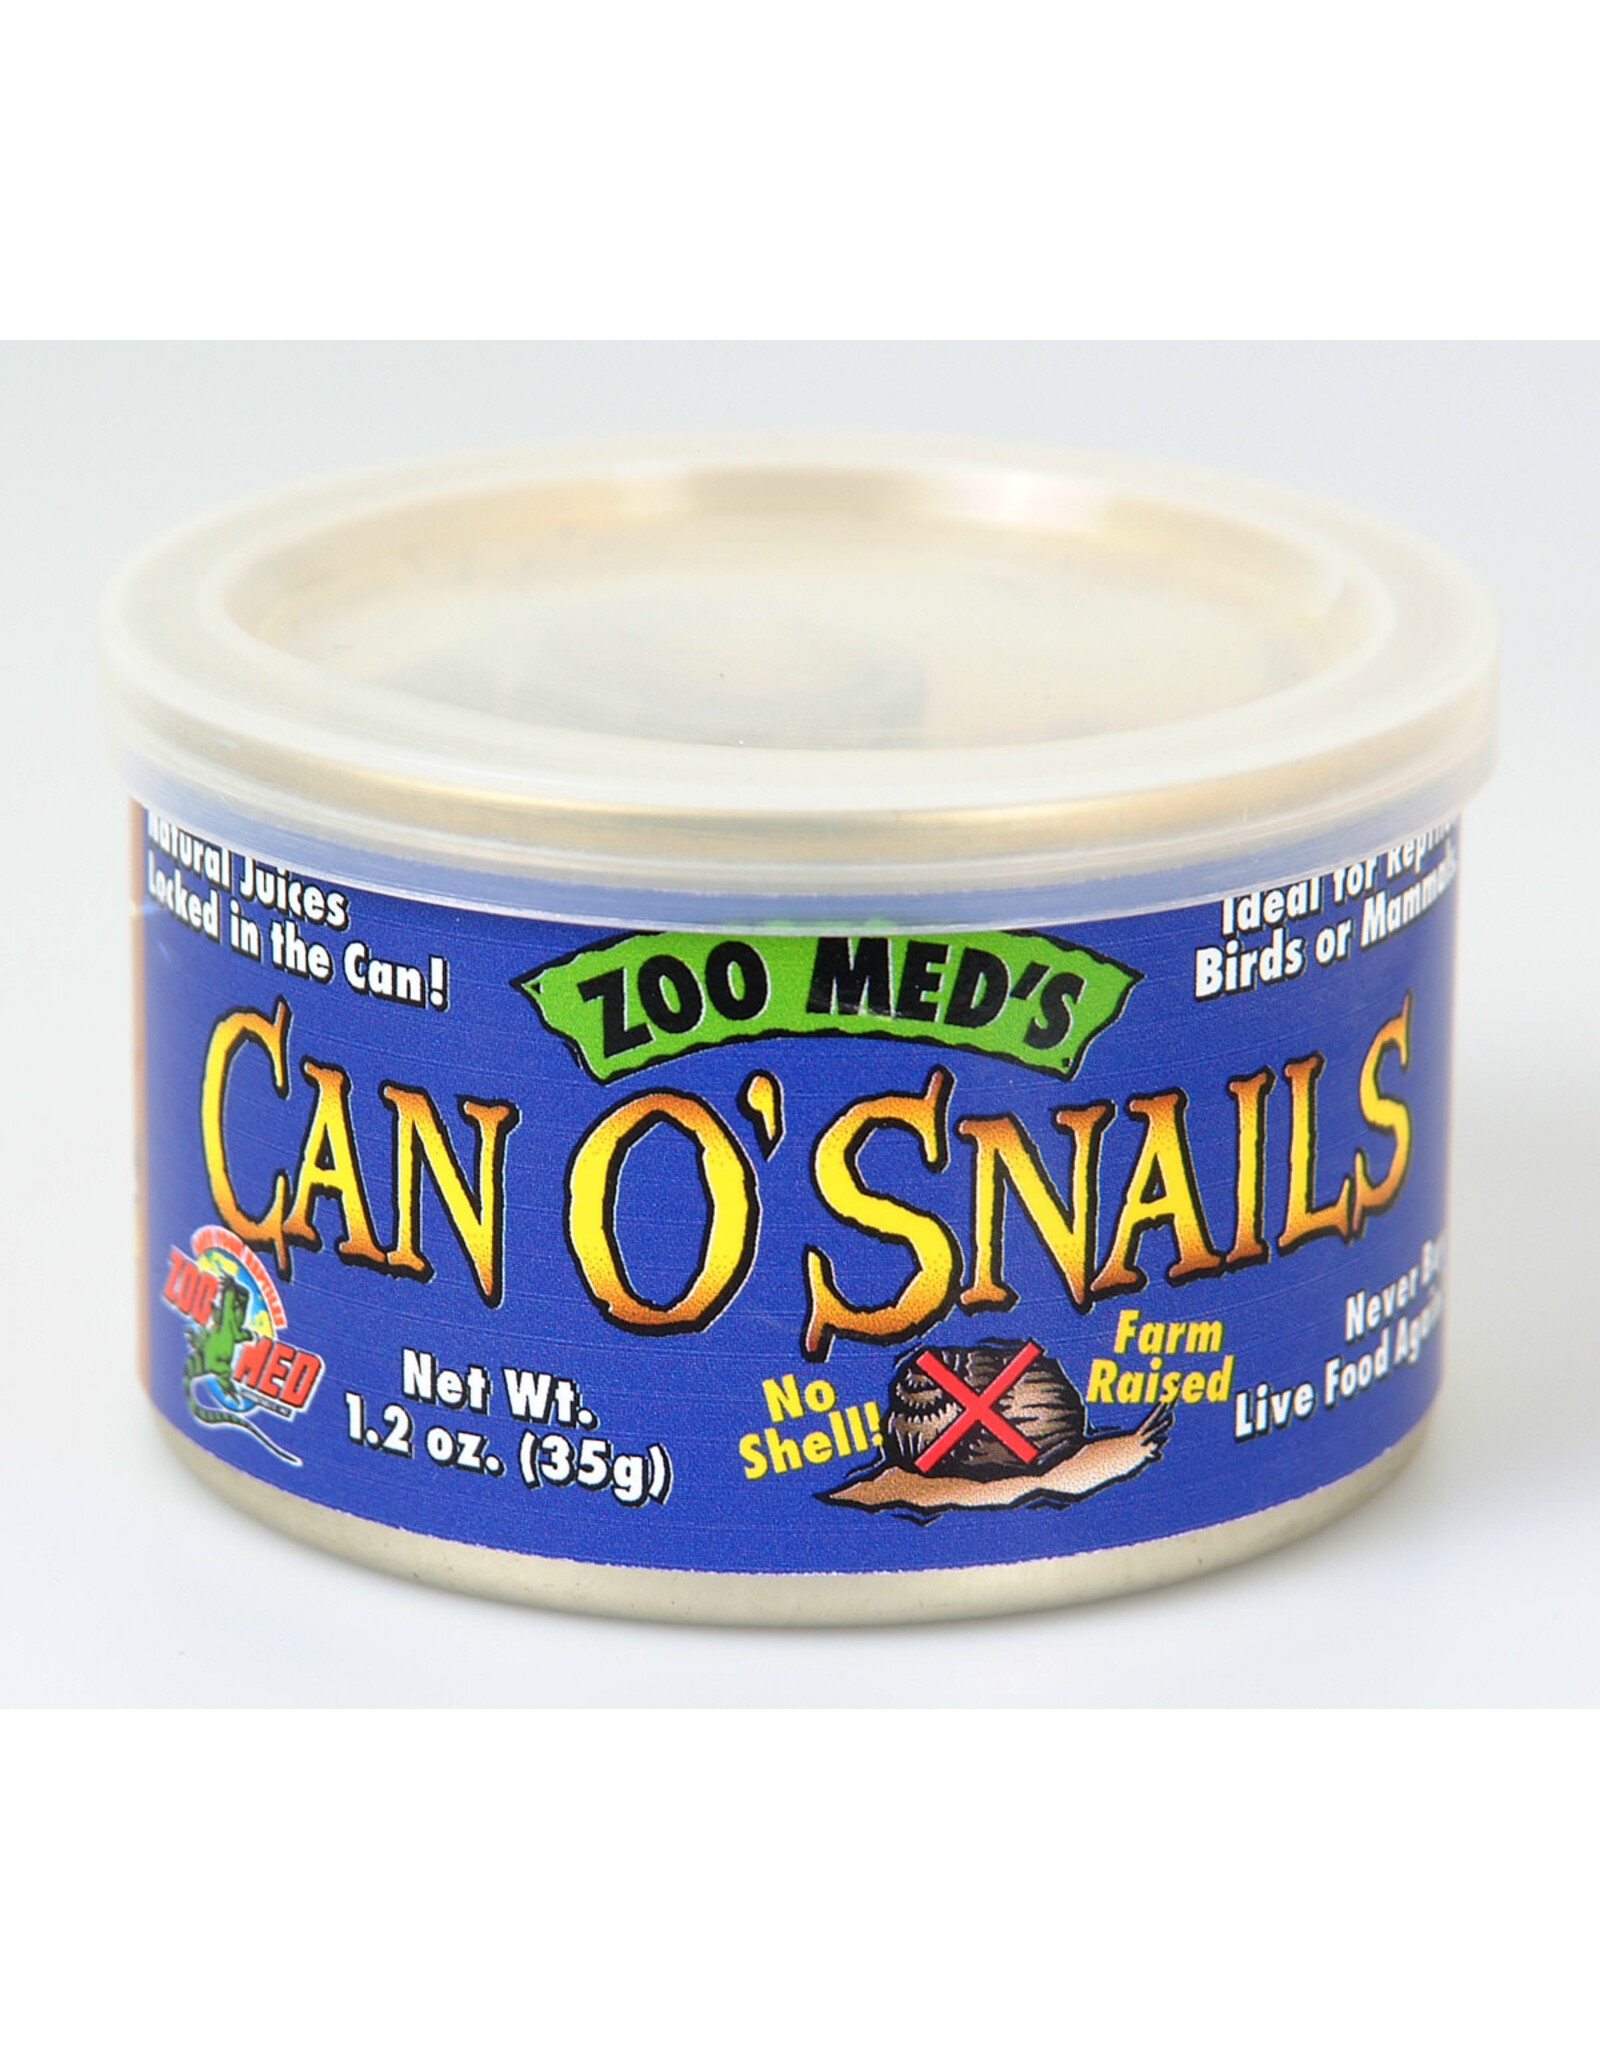 Zoo Med Can O' Snails** Zoo Med